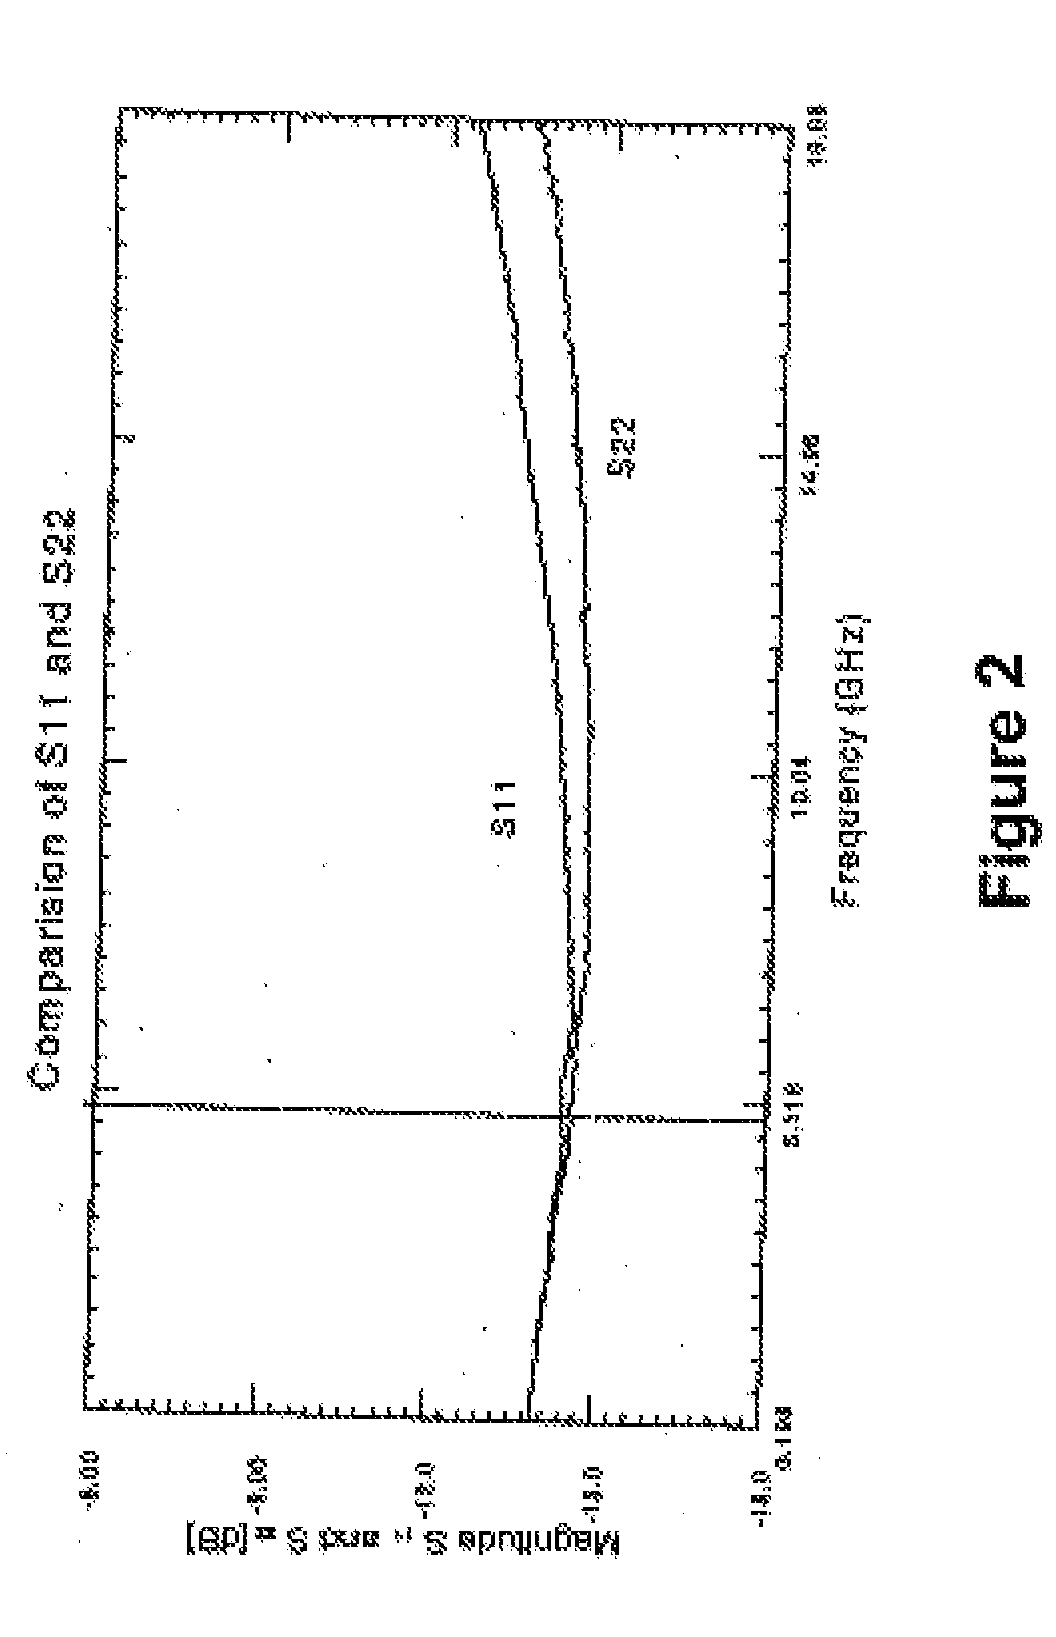 Measurement Arrangement for Determining the Characteristic line Parameters by Measuring Scattering Parameters